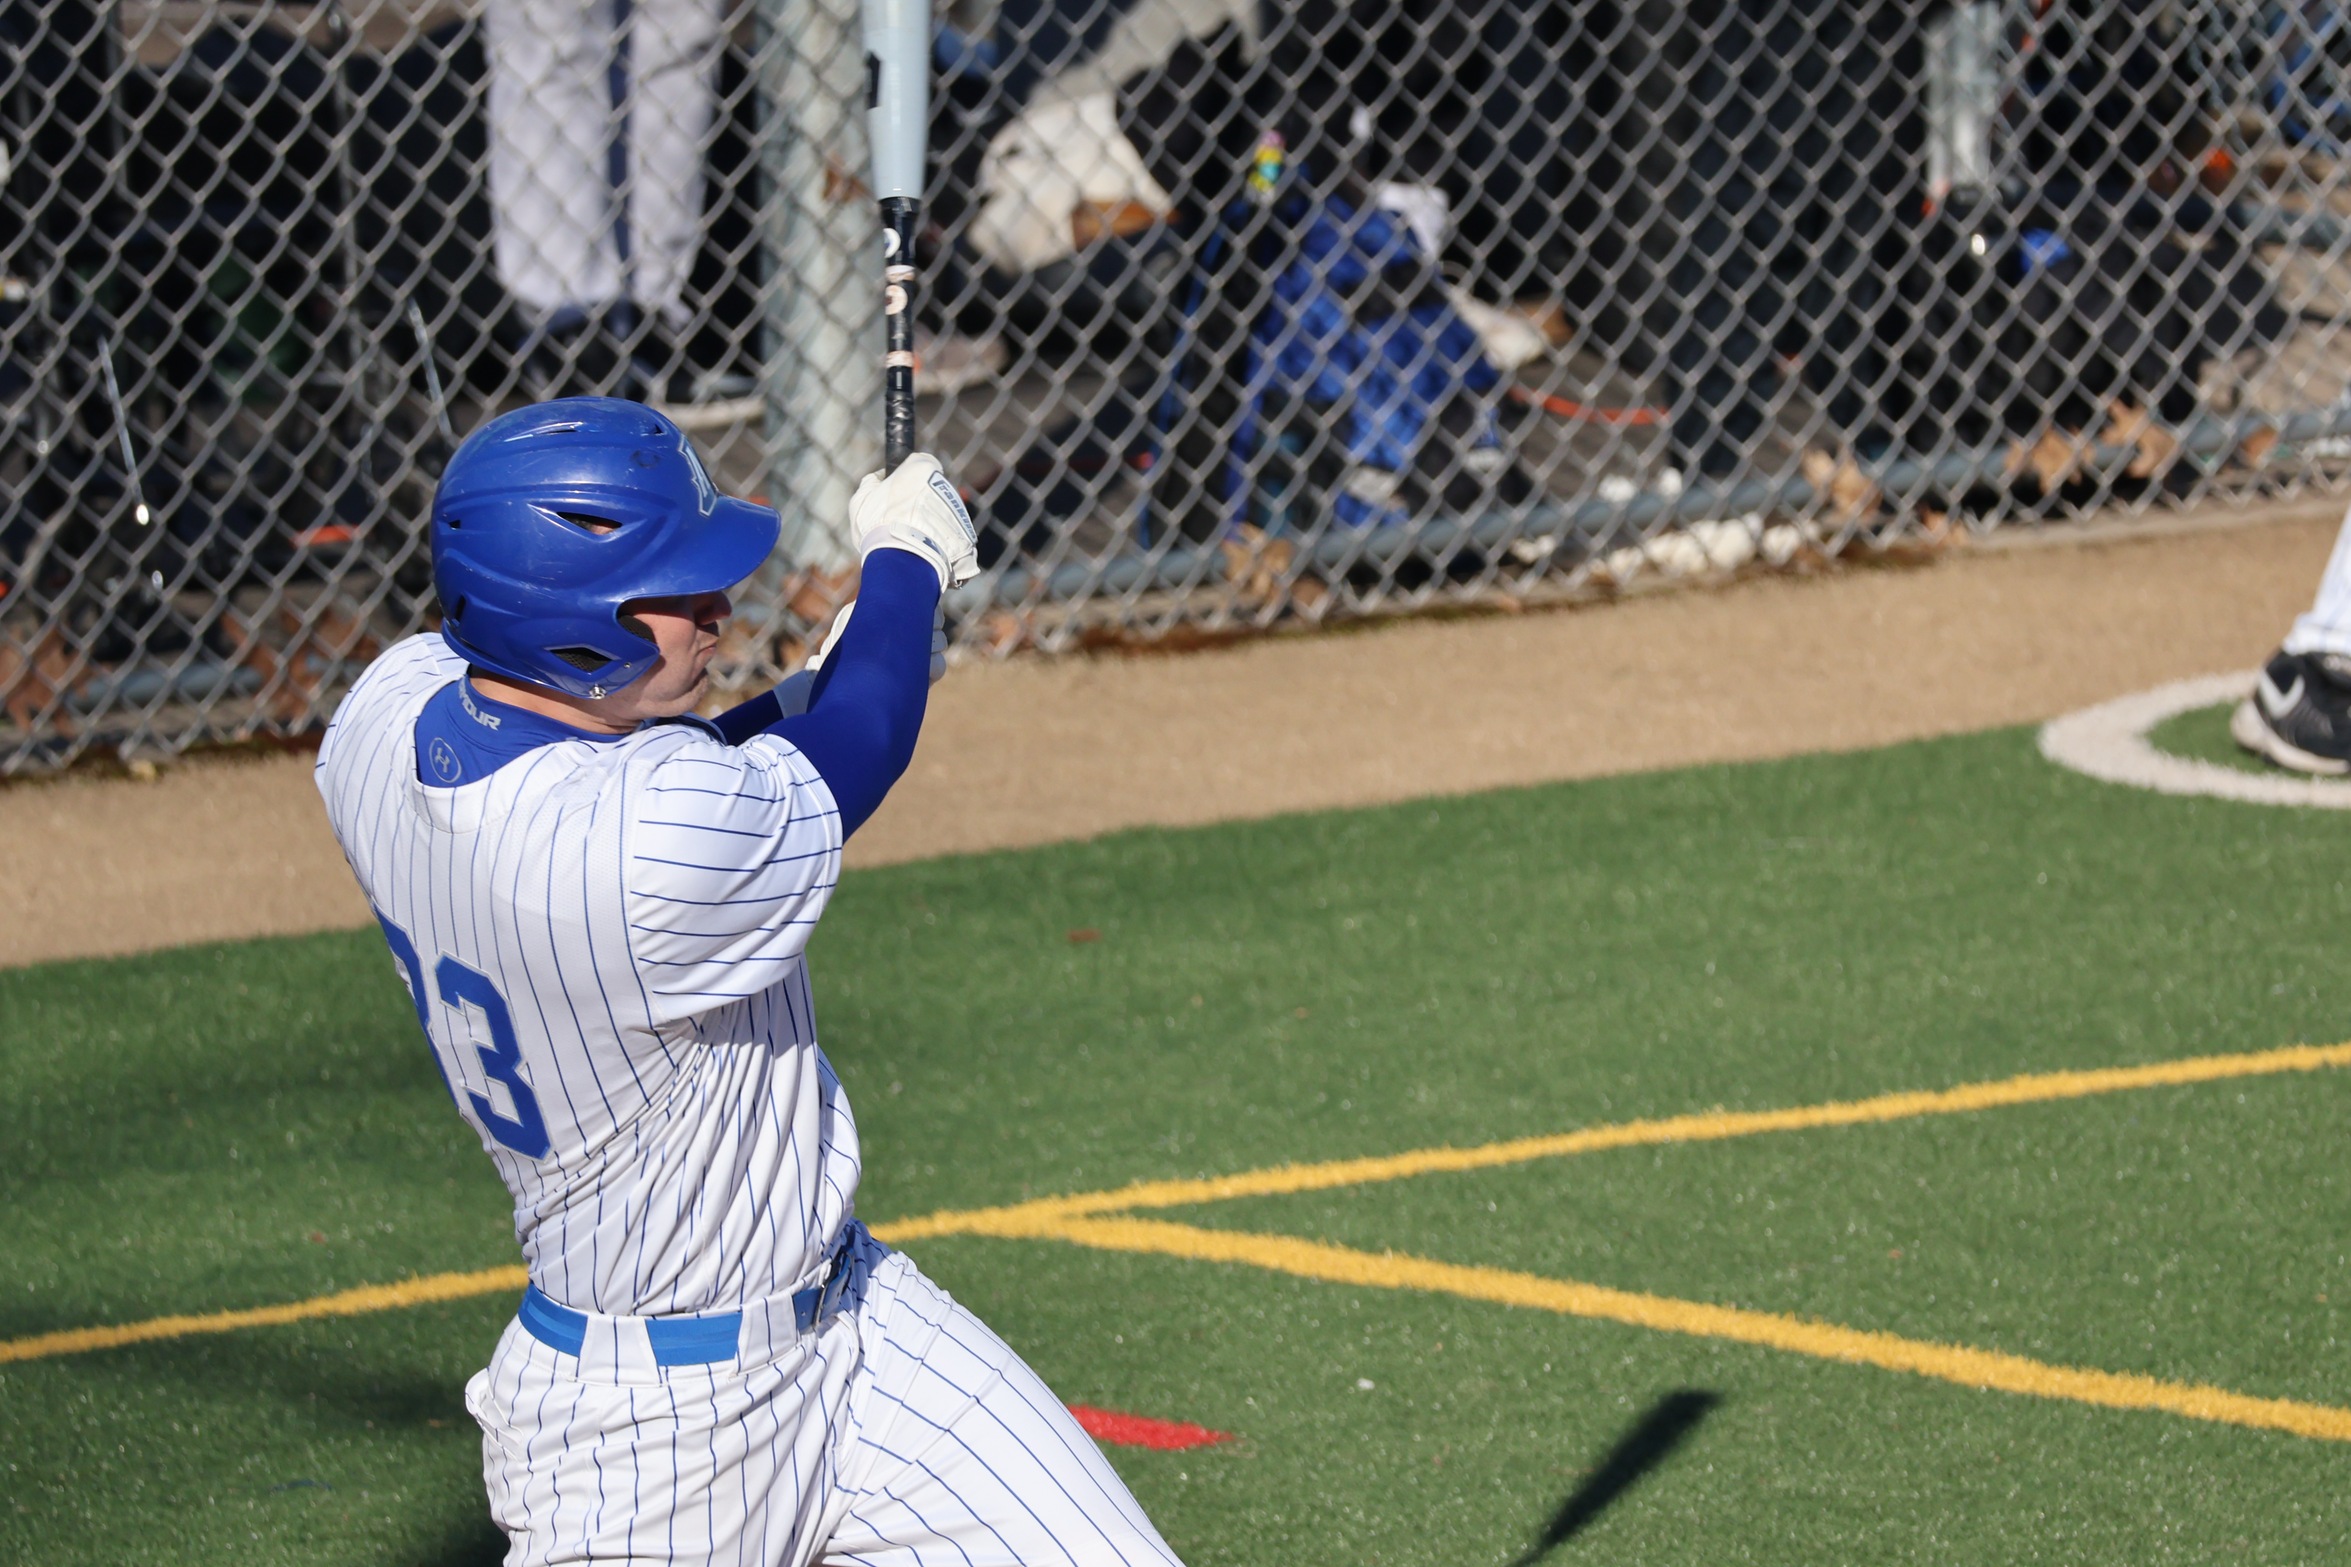 Spataj Homers Twice, But Baseball Loses In Ten Innings To Lasell